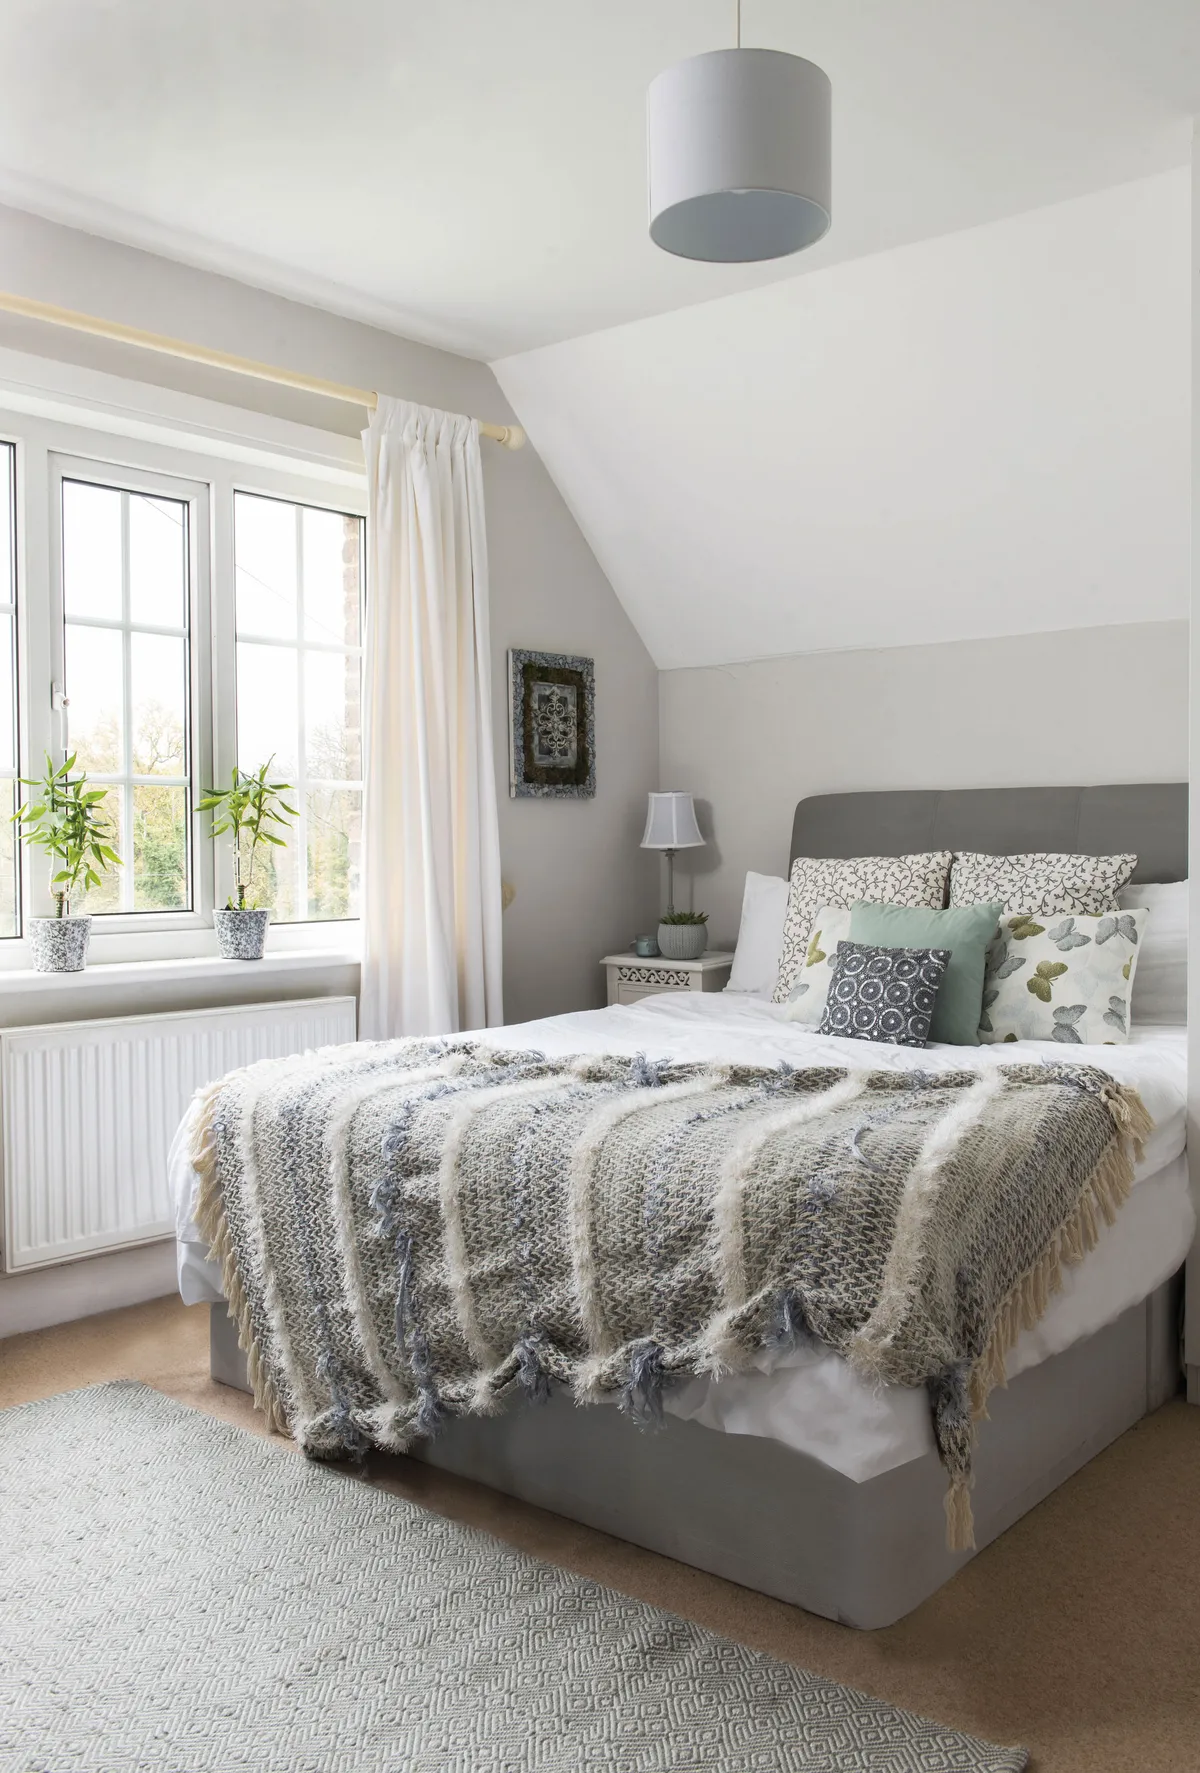 Danecia has incorporated her love of the countryside into her schemes with plants, botanical prints and textured textiles in natural fabrics. She’s styled the guest bed with butterfly cushions and a tactile throw to make it super cosy